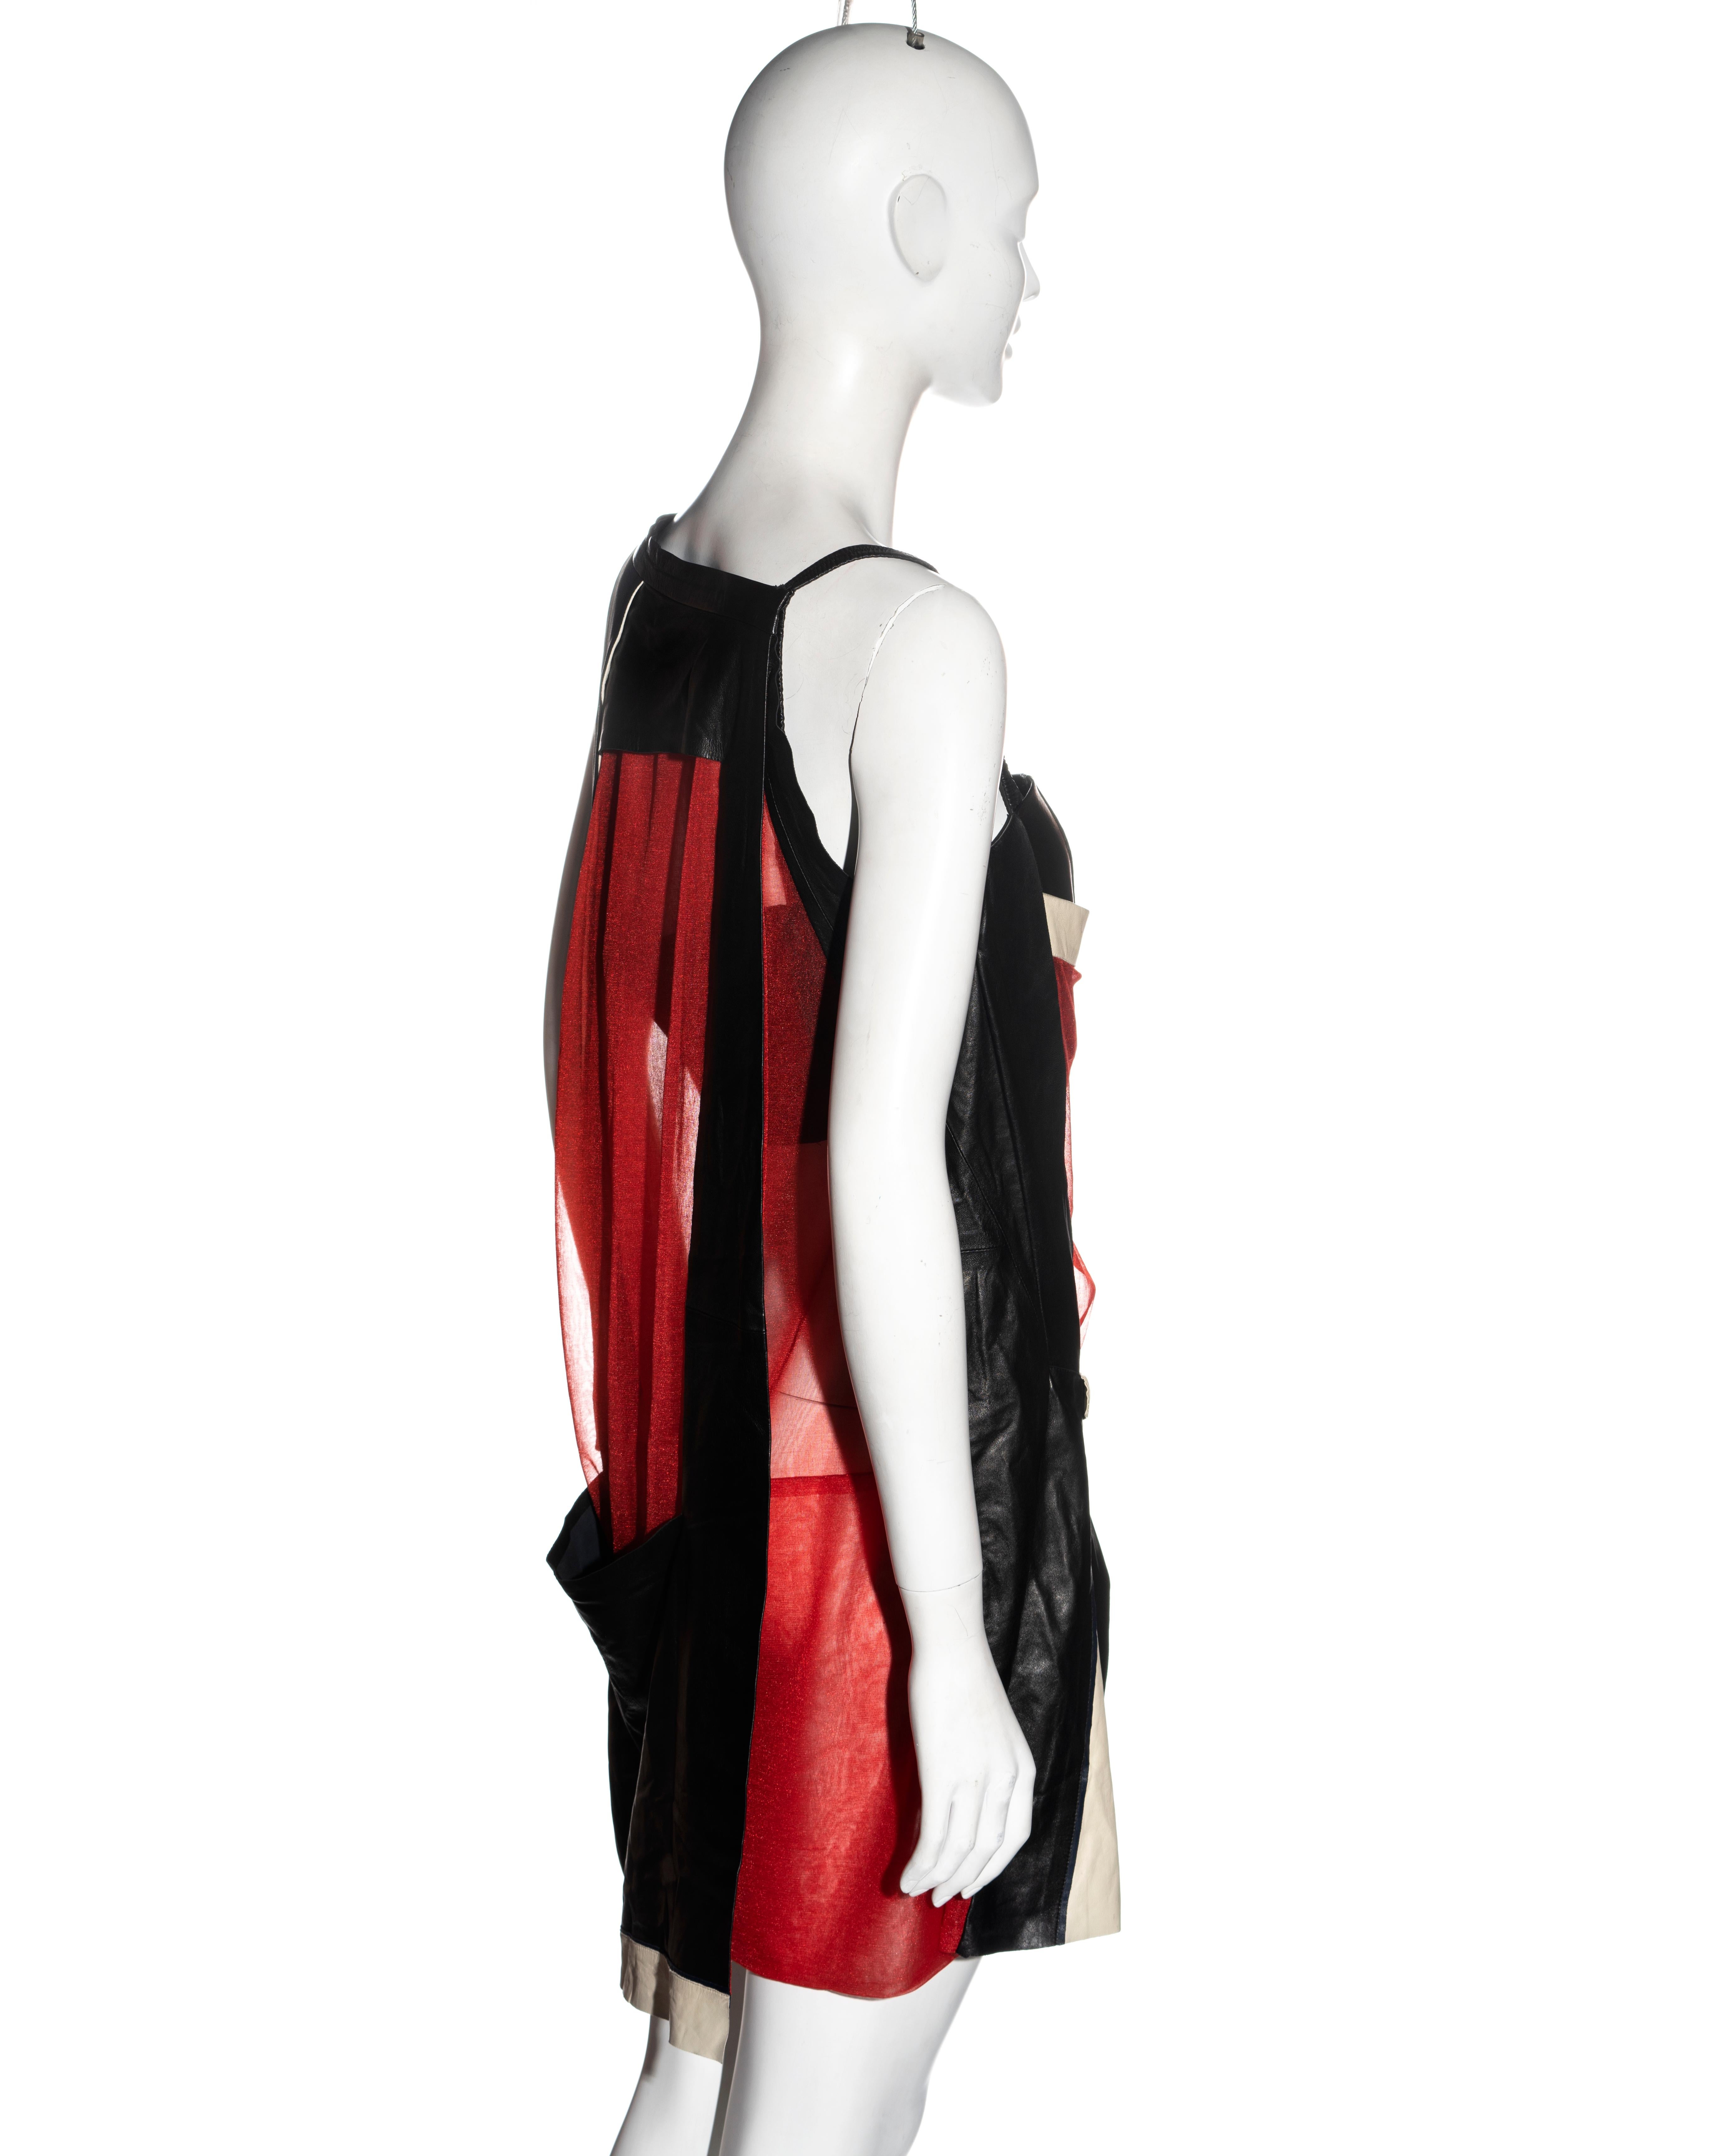 Balenciaga by Nicolas Ghesquière black and red leather mini dress, ss 2010 For Sale 6